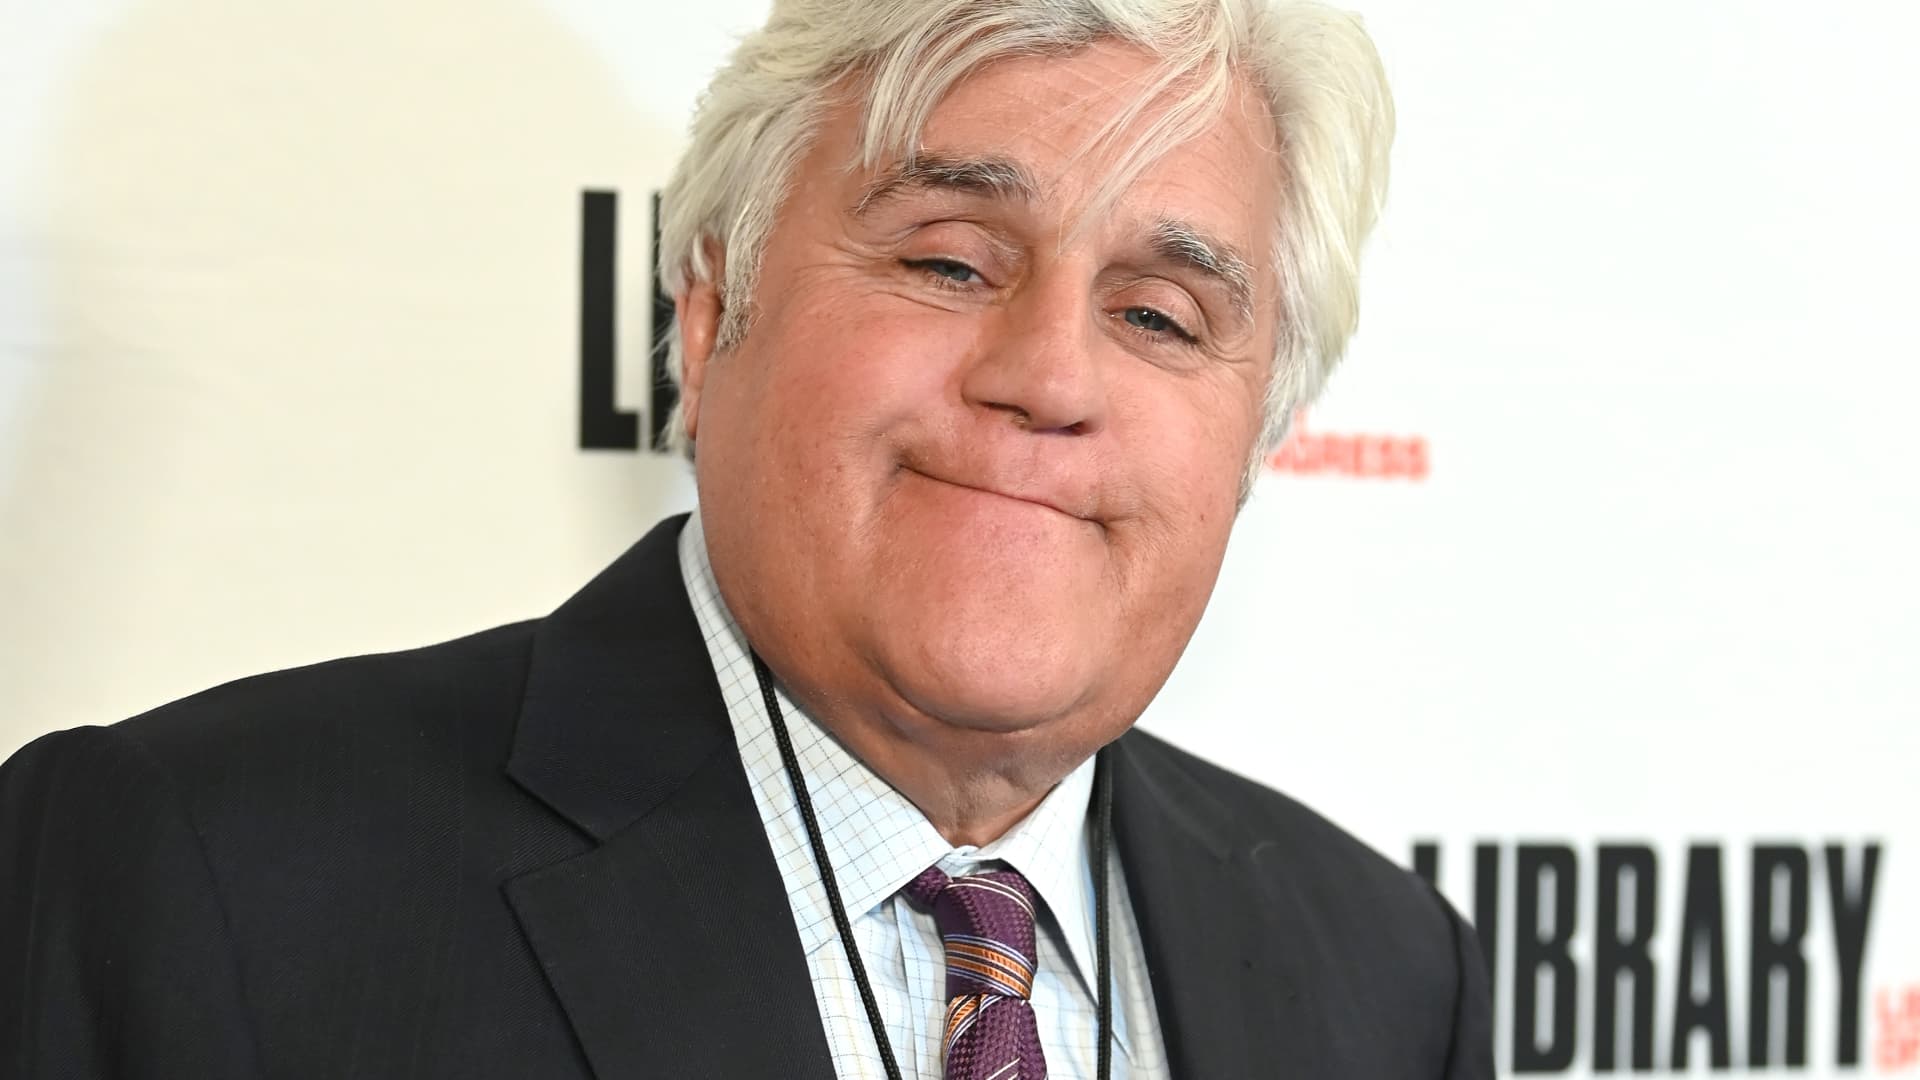 Jay Leno says he's 'ok' after he suffers serious burns in car fire - CNBC (Picture 1)